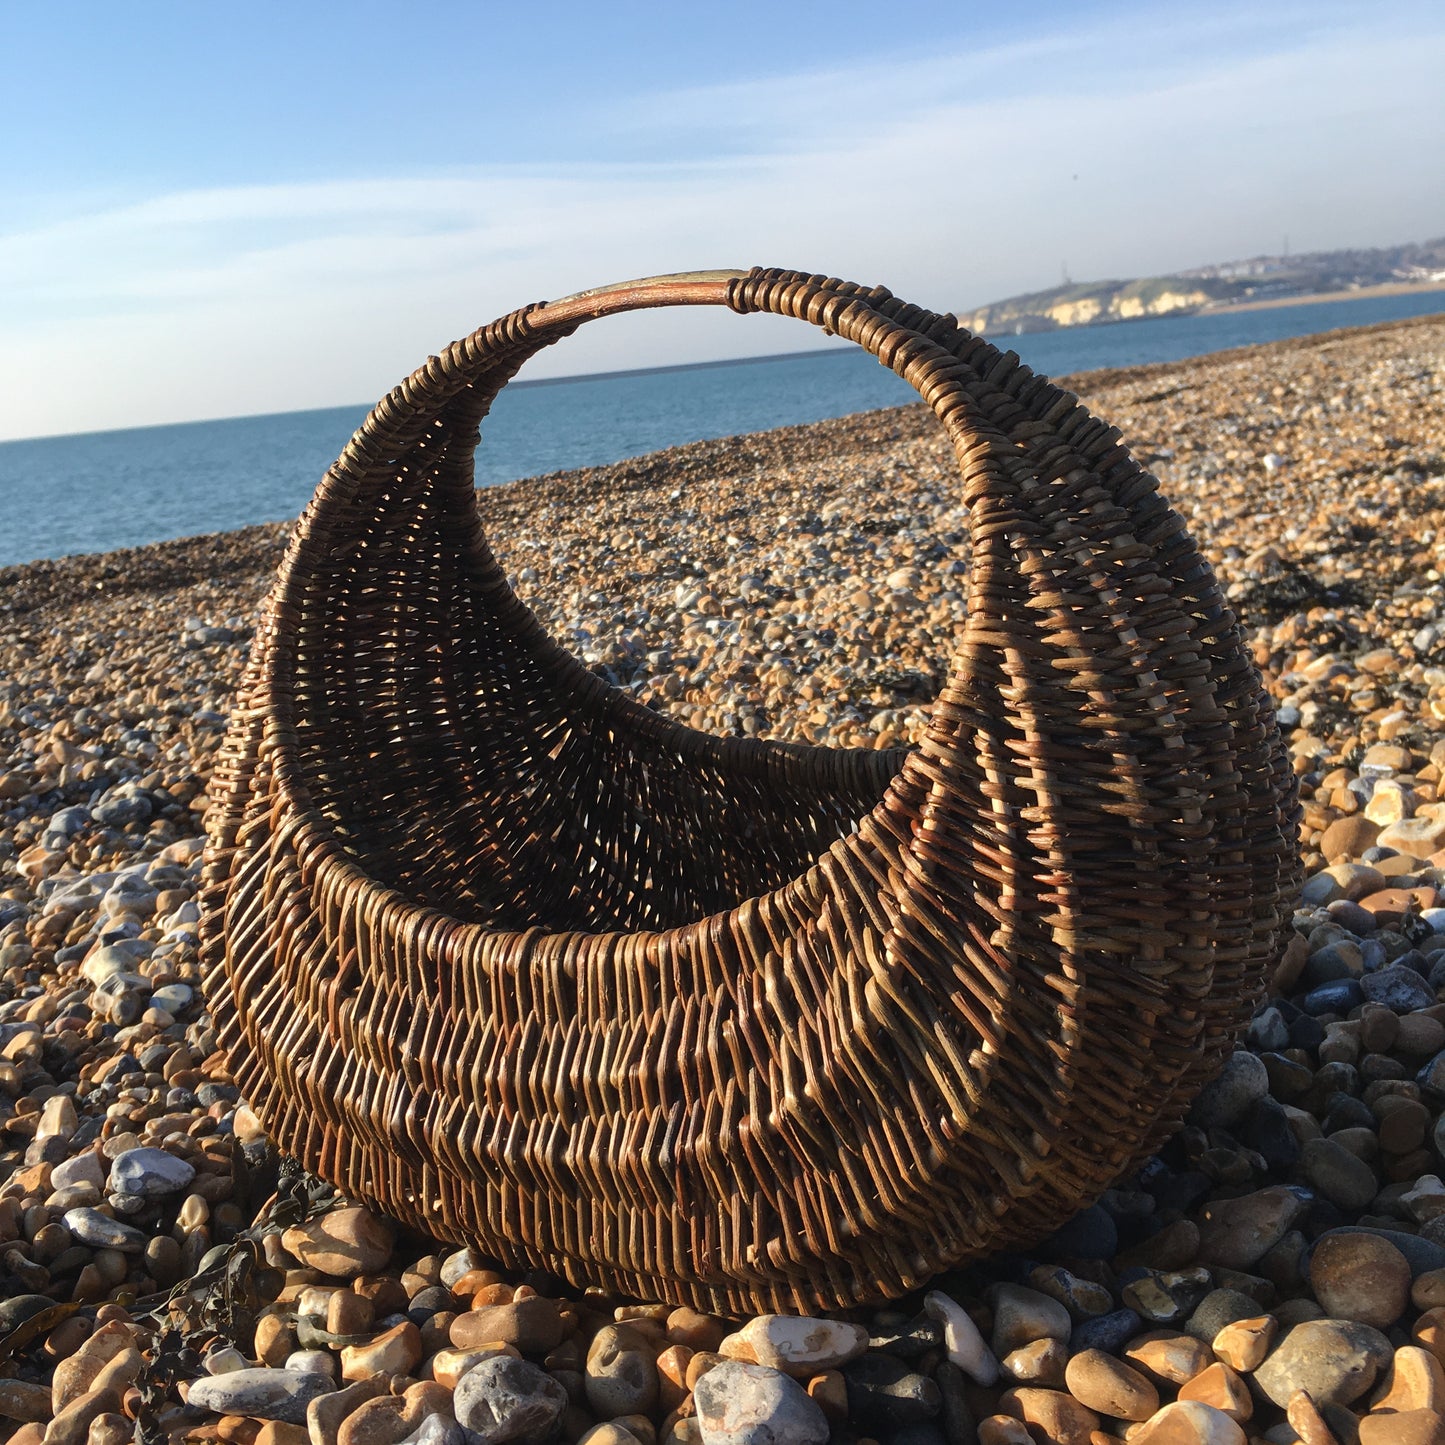 Weave a Traditional Hen Basket 5th & 6th October 10am - 5pm